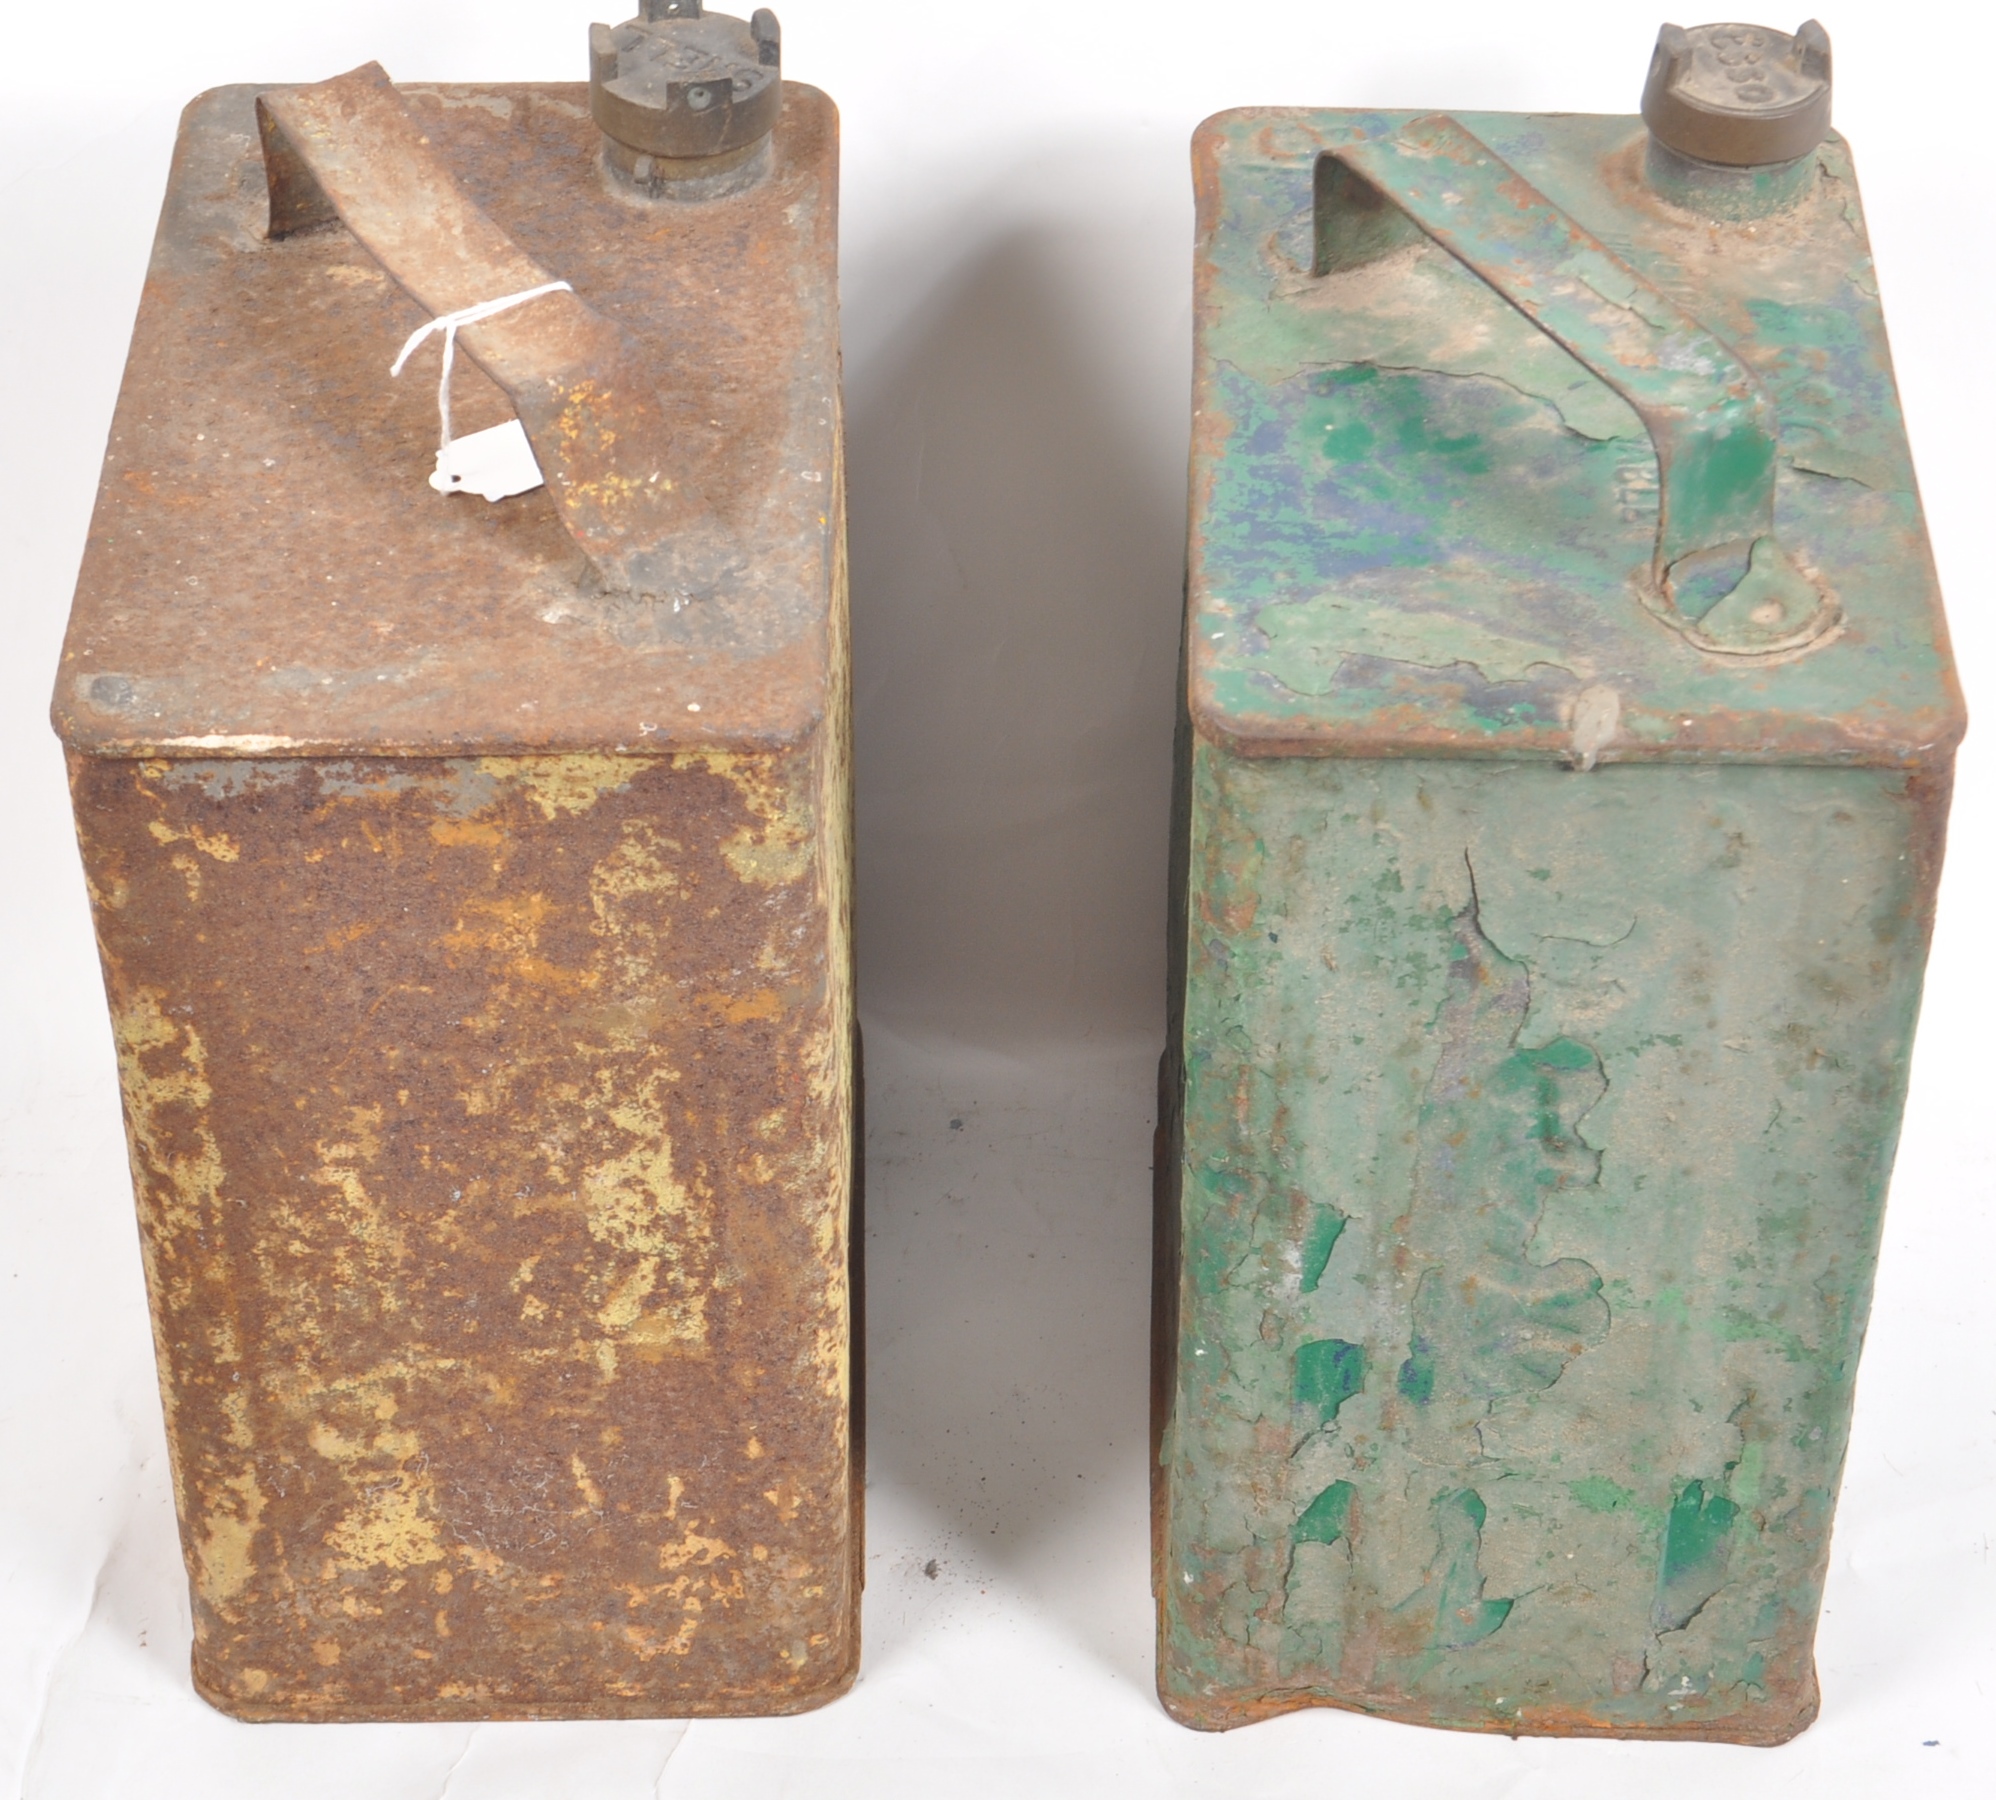 ESSO / SHELL - MOTORING INTEREST - TWO GALLON PETROL CANS - Image 4 of 4